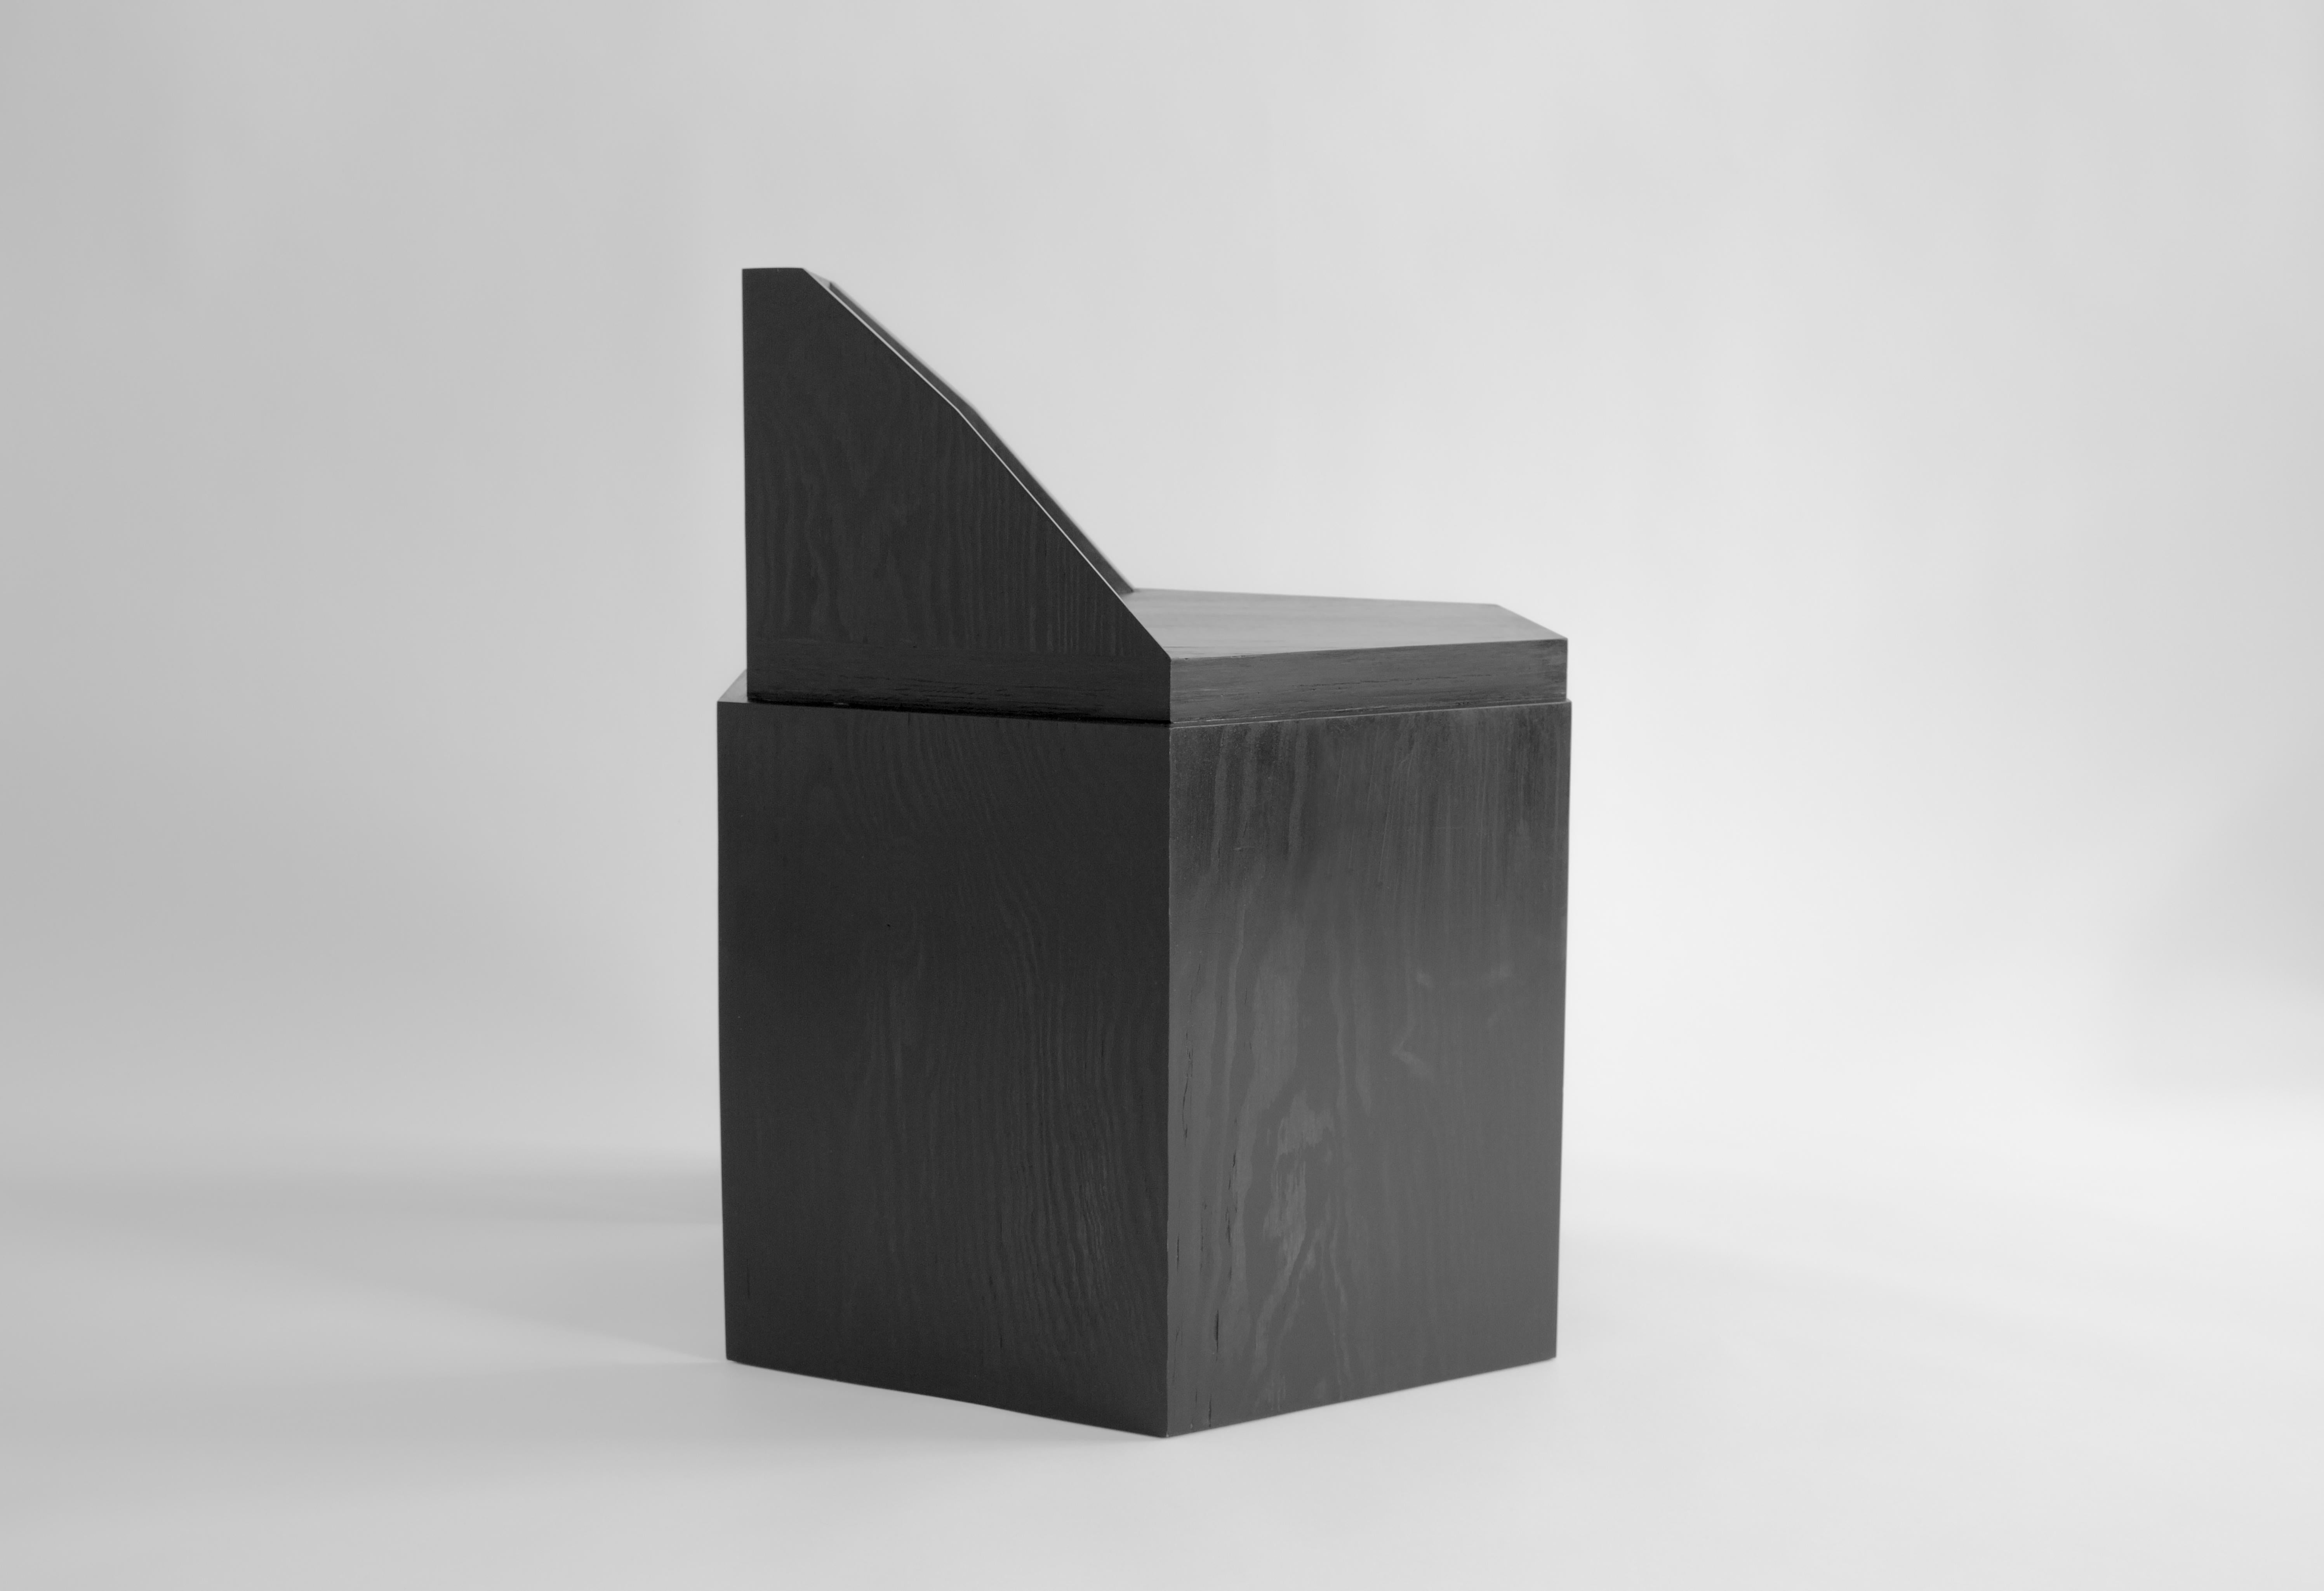 Ana sculpted chair by Sizar Alexis
Limited Edition of 35
Dimensions: Length 62cm, width 50cm,
height 72cm, seat height: 45cm
Comes in black, white stained and
natural pine plywood
Signed and numbered pieces.
Delivery time 4-6 weeks

About